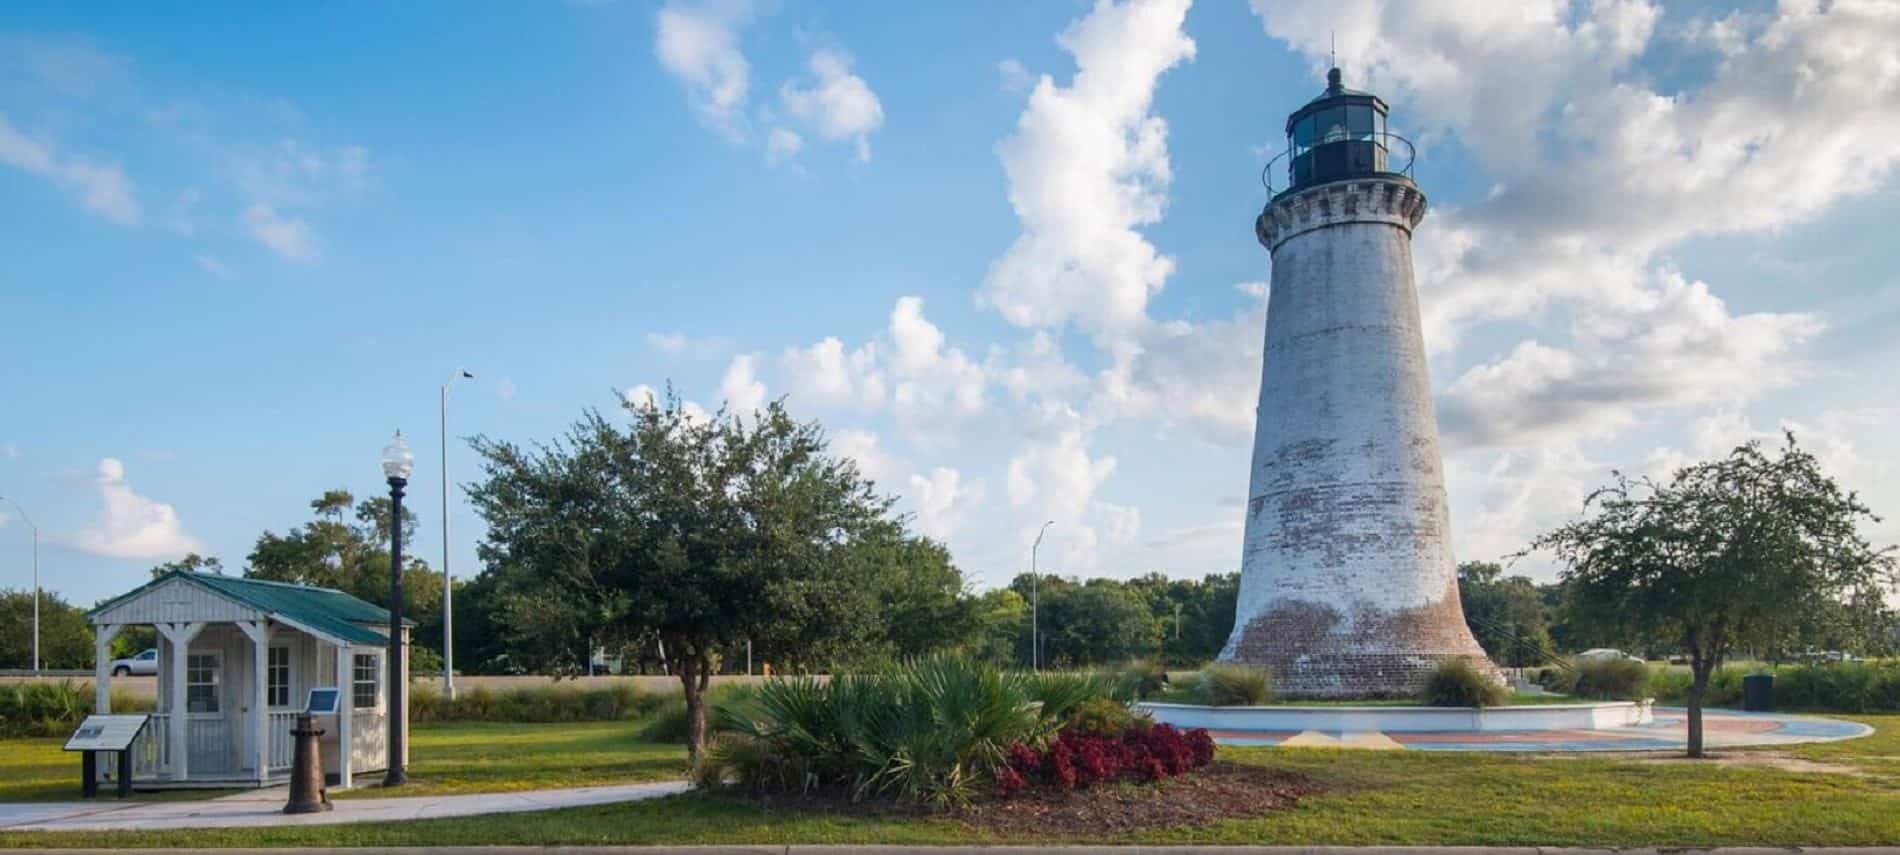 1859 Round Island lighthouse rescued from Mississippi Sound after Hurricane Katrina and relocated, surrounded by trees, grass and blue skies